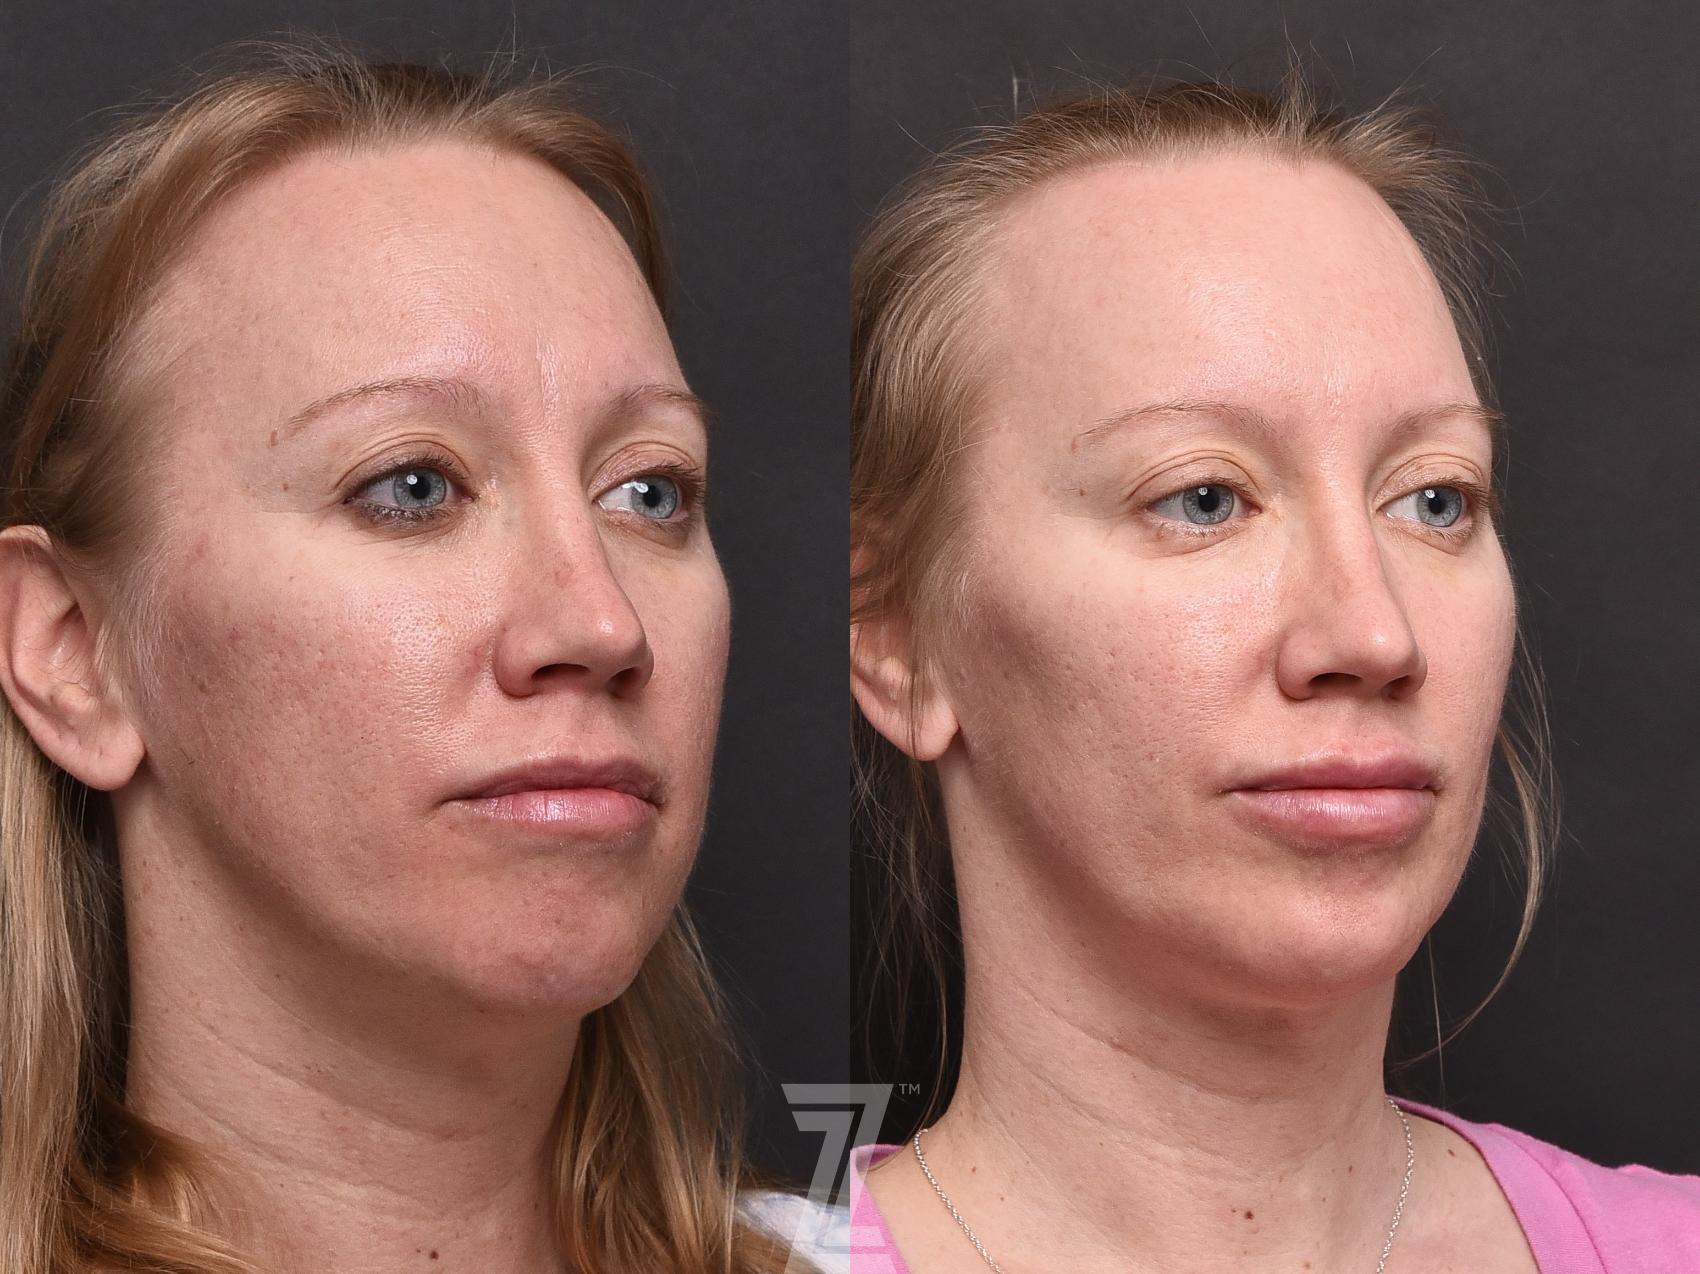 Botox, Neurotoxin, Dysport, Before and After, B&A, Tummy Tuck, Breast Aug, Breast Lift, Mastopexy, MMO, Mommy Makeover, Dr. Rocco Piazza, The Piazza Center, Austin, Tx, Halo, BBLlaser